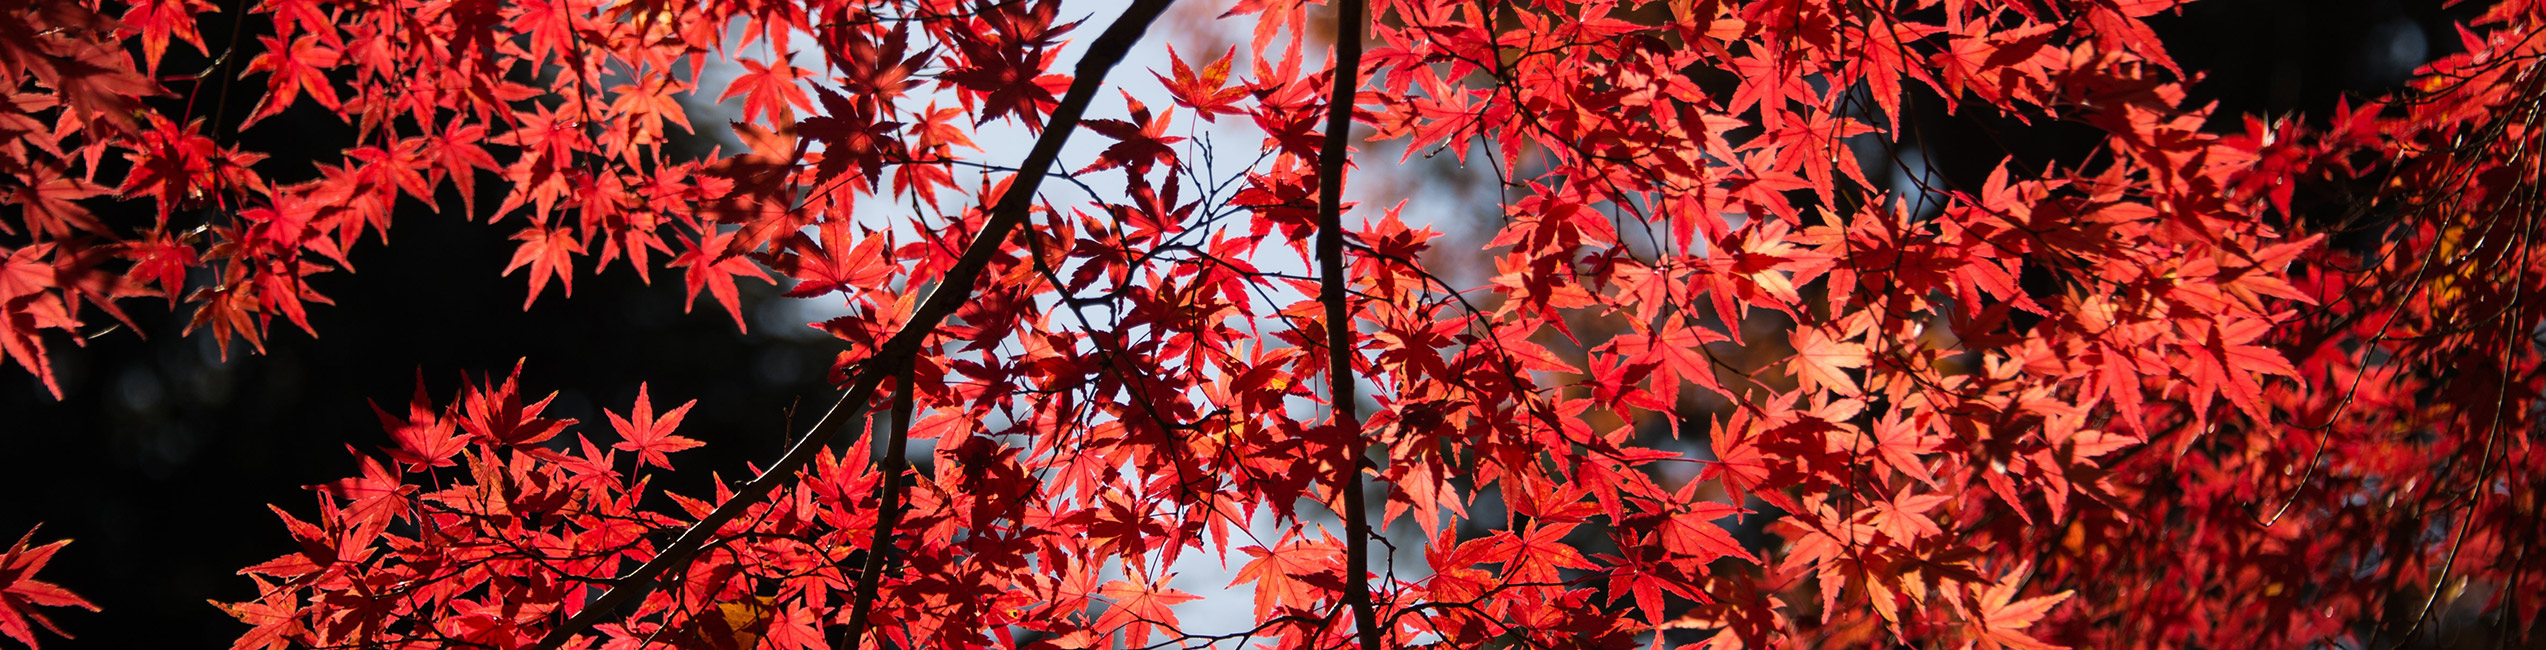 Branches of a tree with red leaves